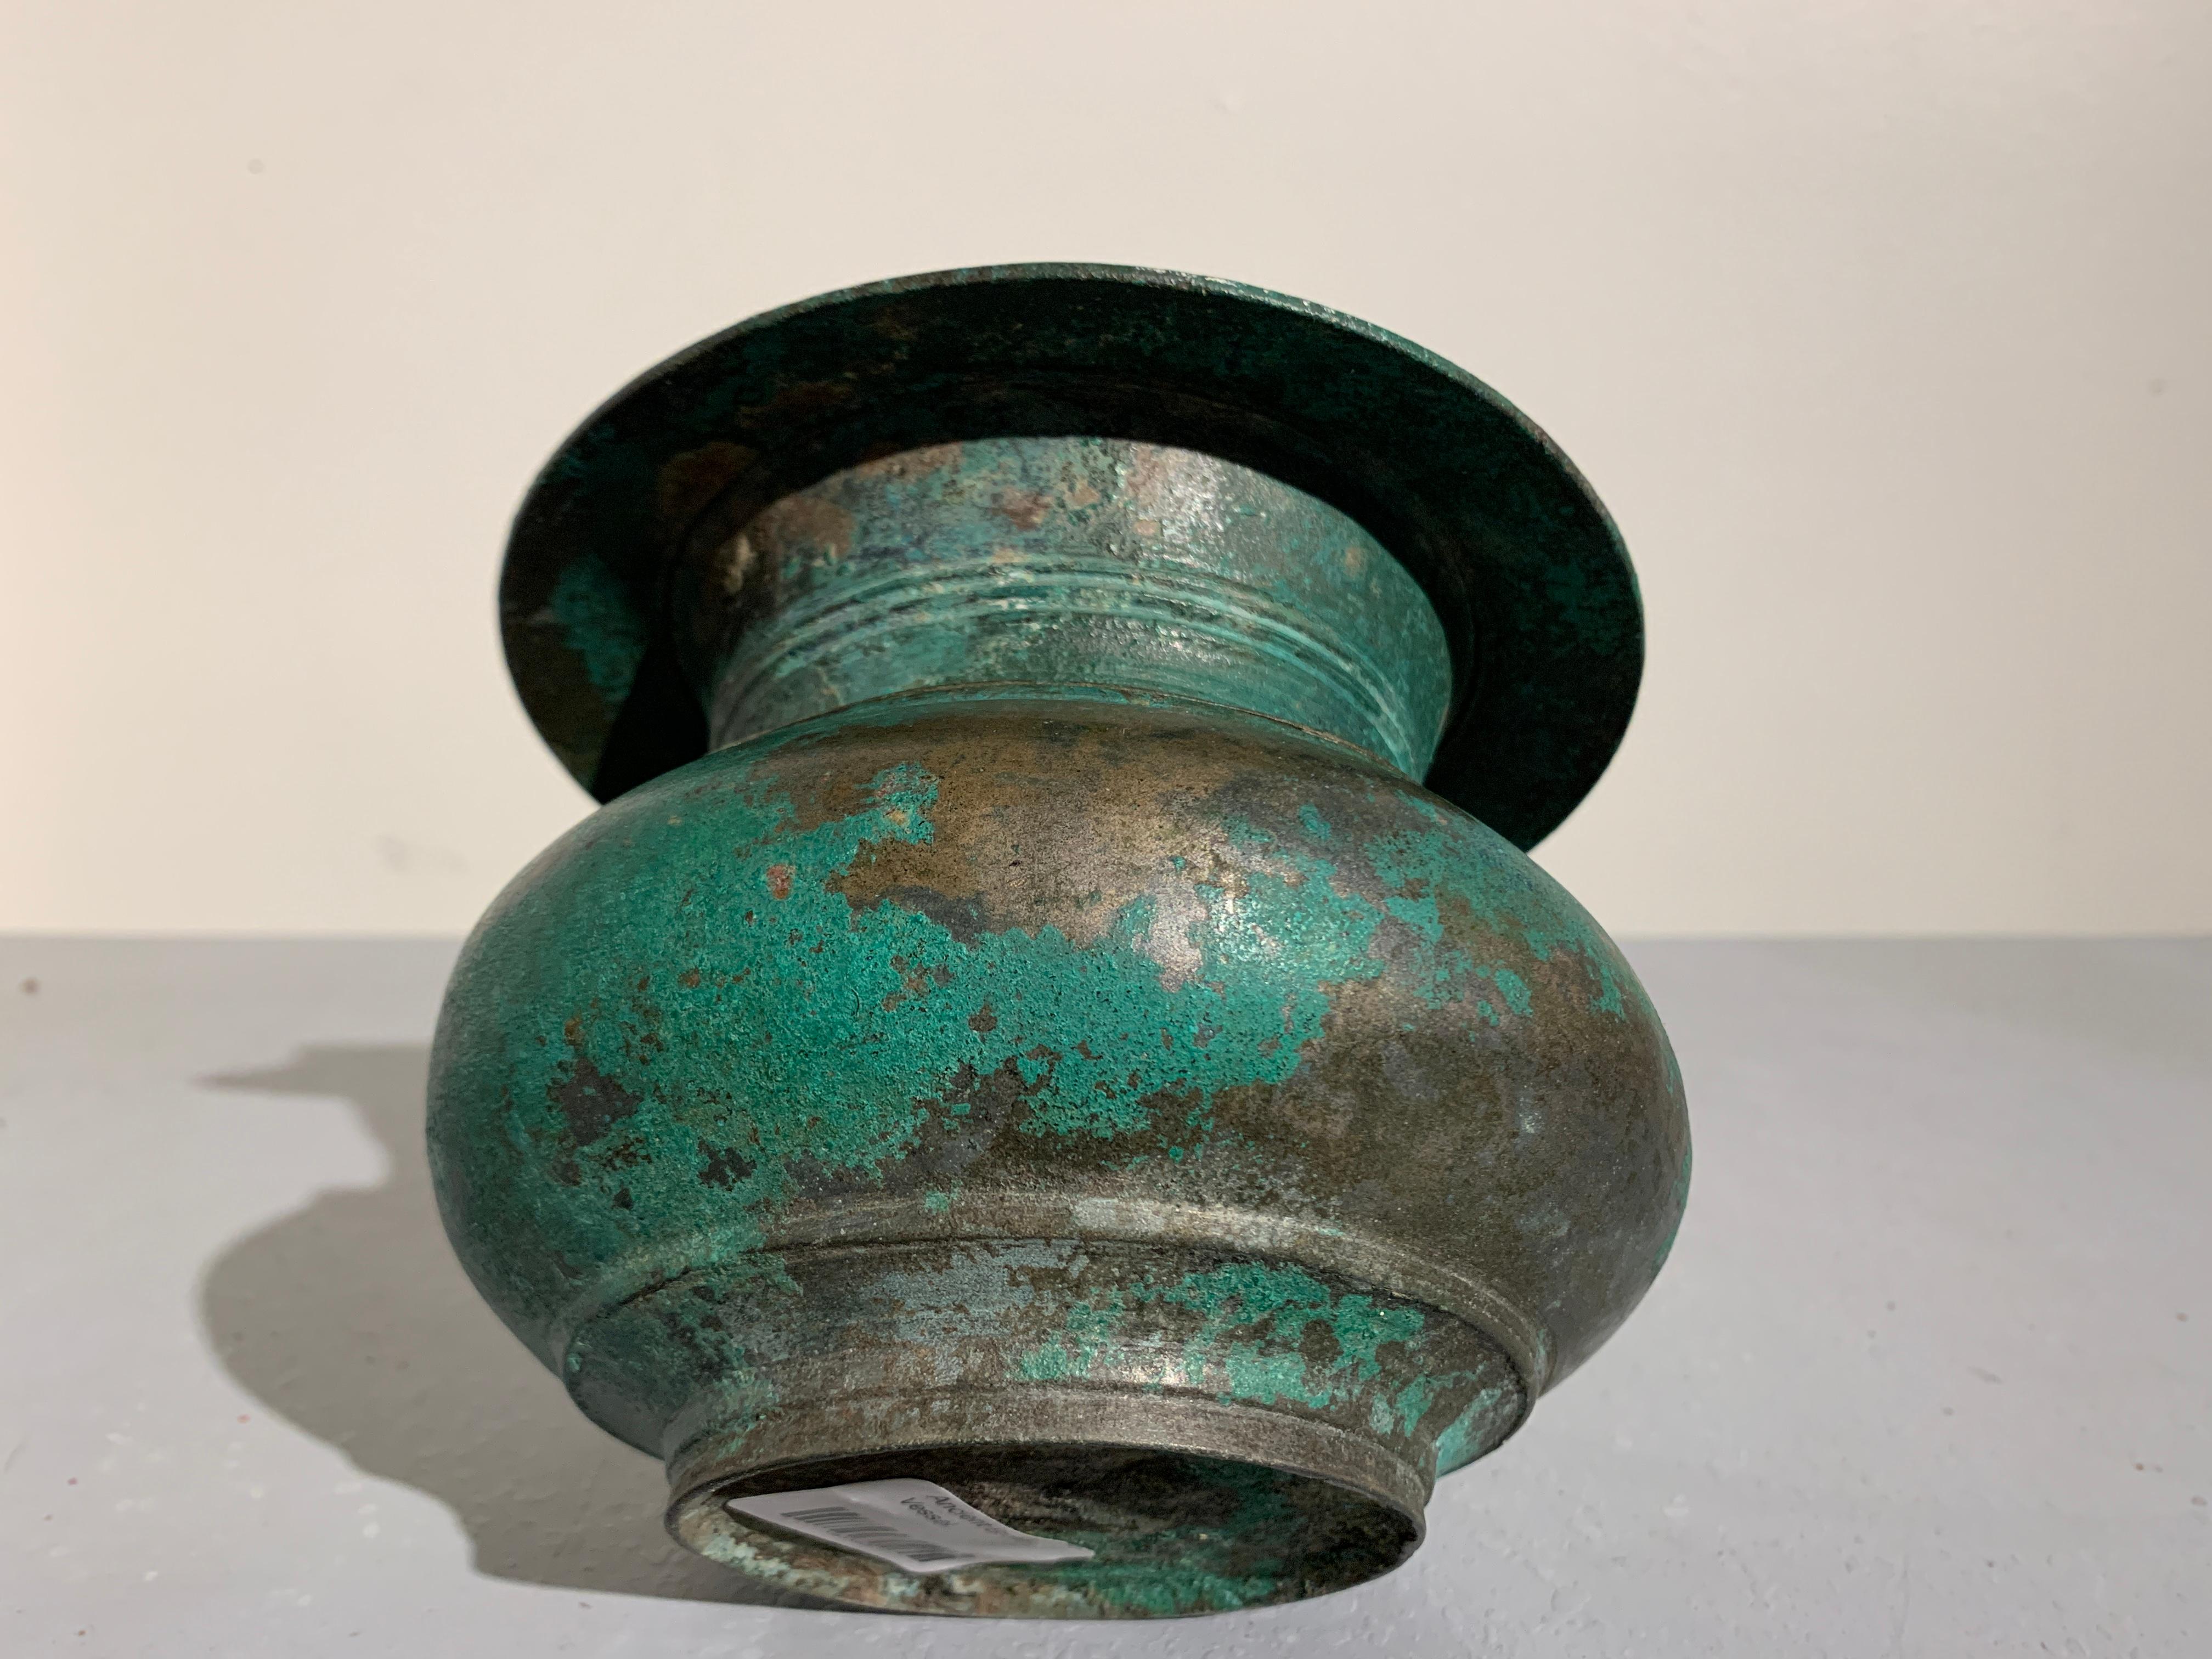 18th Century and Earlier Javanese Bronze Offering Vessel, Central Javanese Period, 13th Century